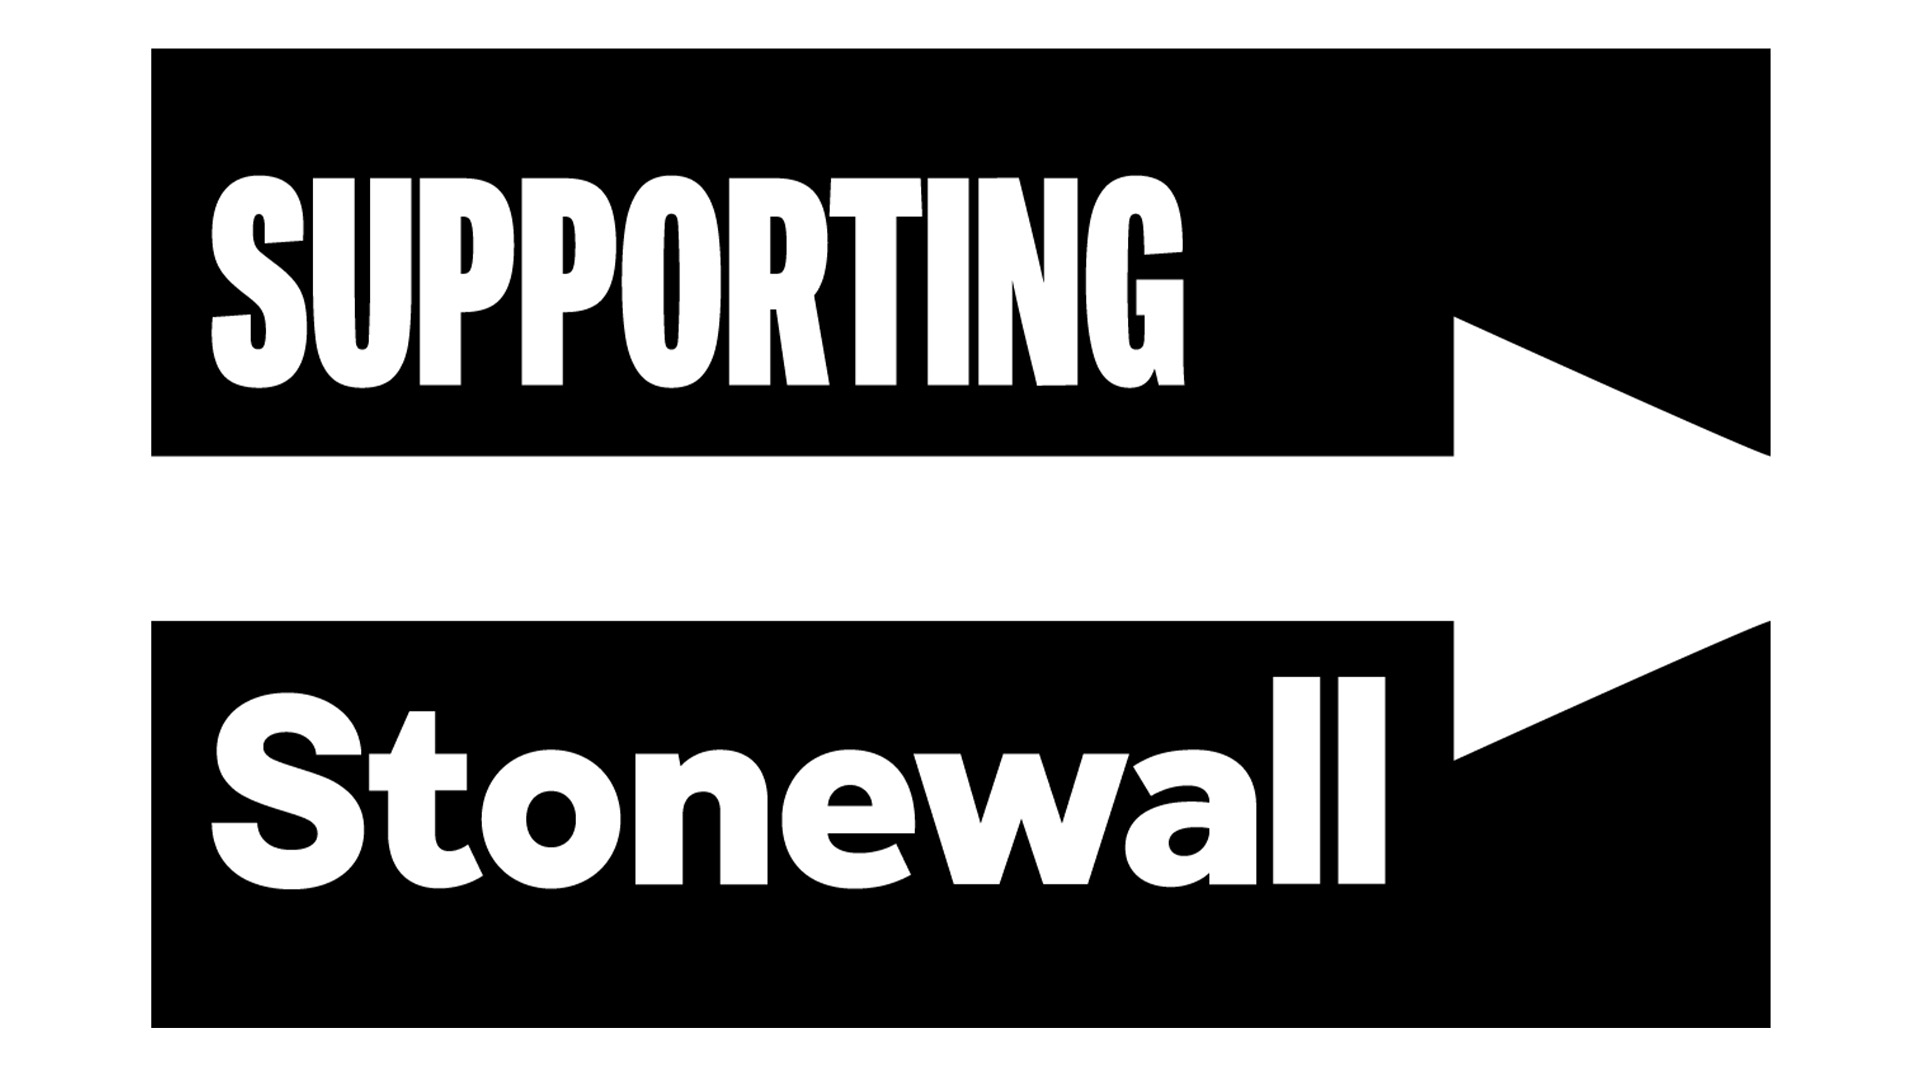 100% of the donations made at Curzon venues will go to STONEWALL